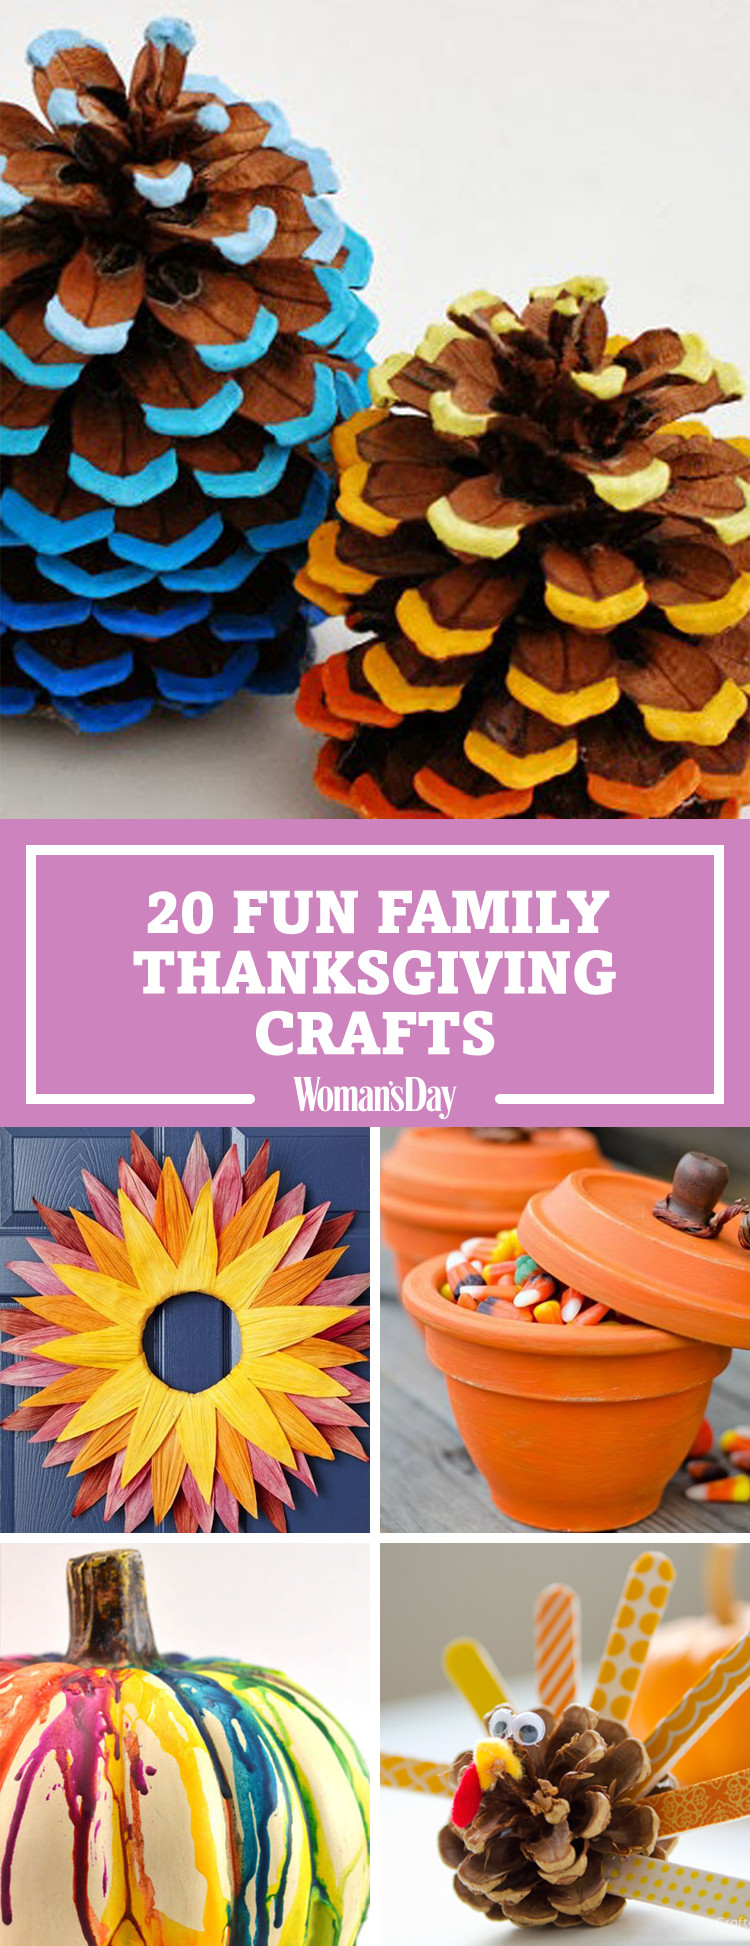 Thanksgiving Gift Ideas For The Family
 29 Fun Thanksgiving Crafts for Kids Easy DIY Ideas to